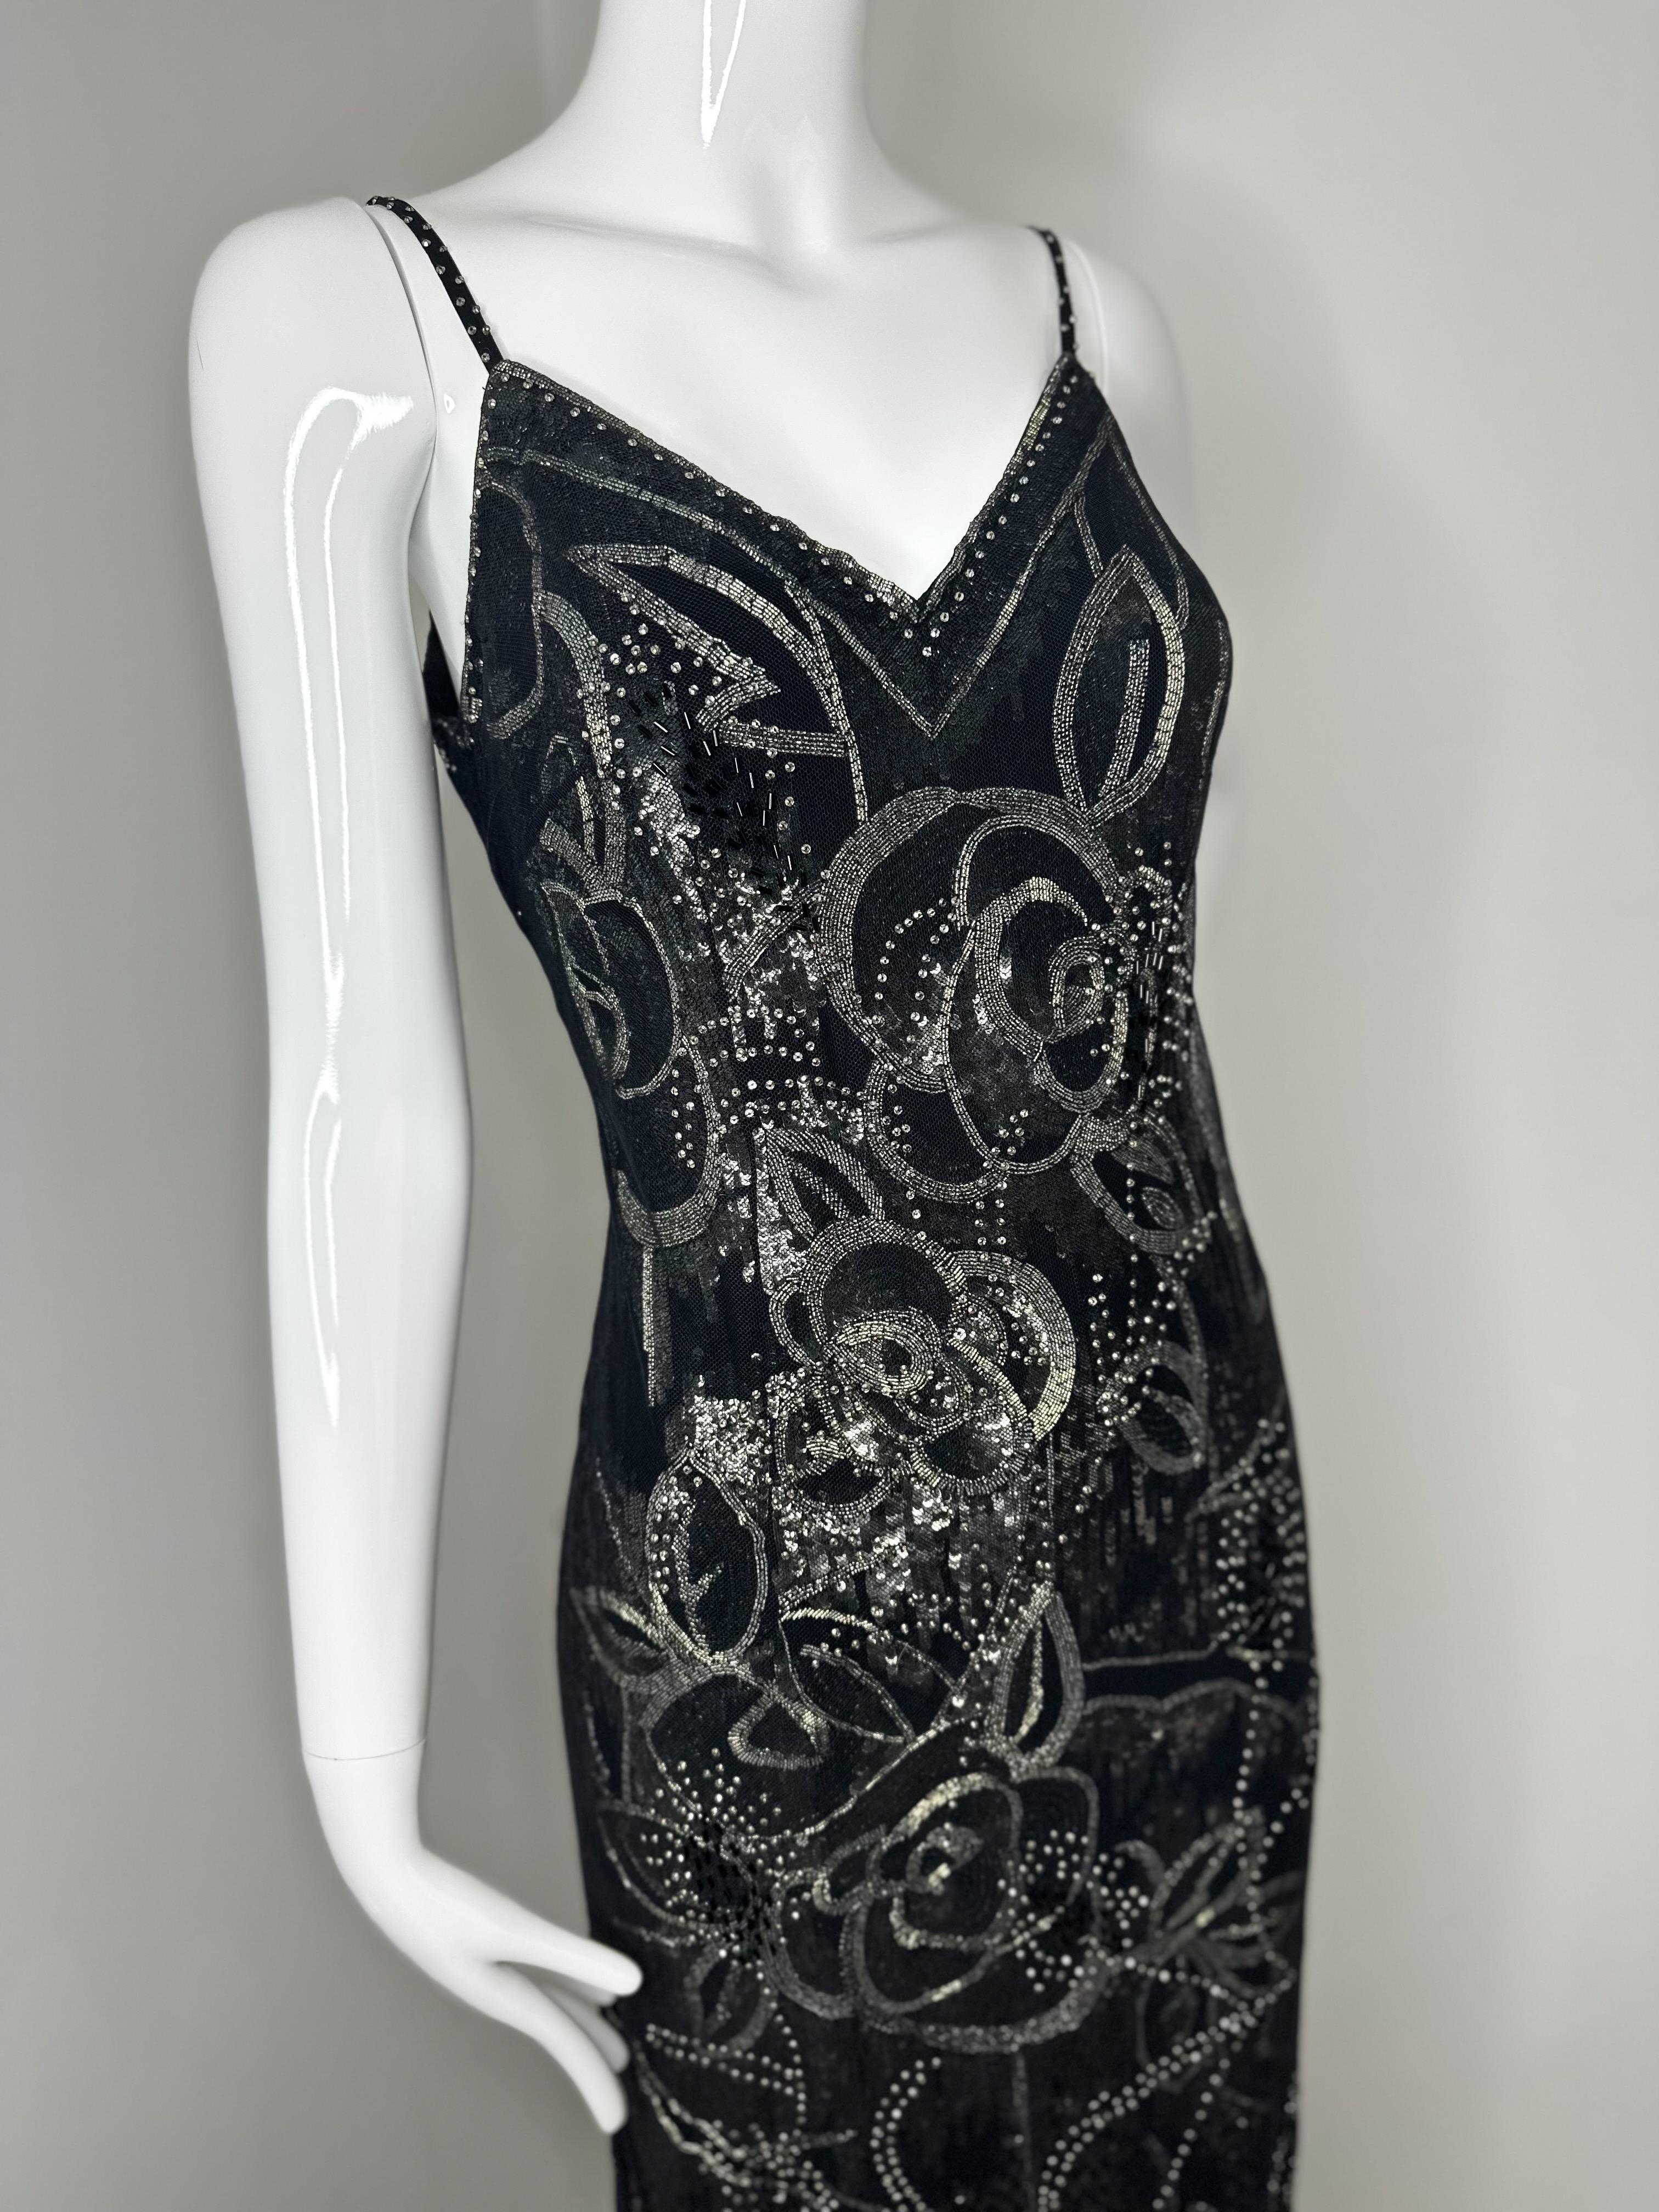 Ralph Lauren Collection beaded maxi dress In Good Condition For Sale In Annandale, VA